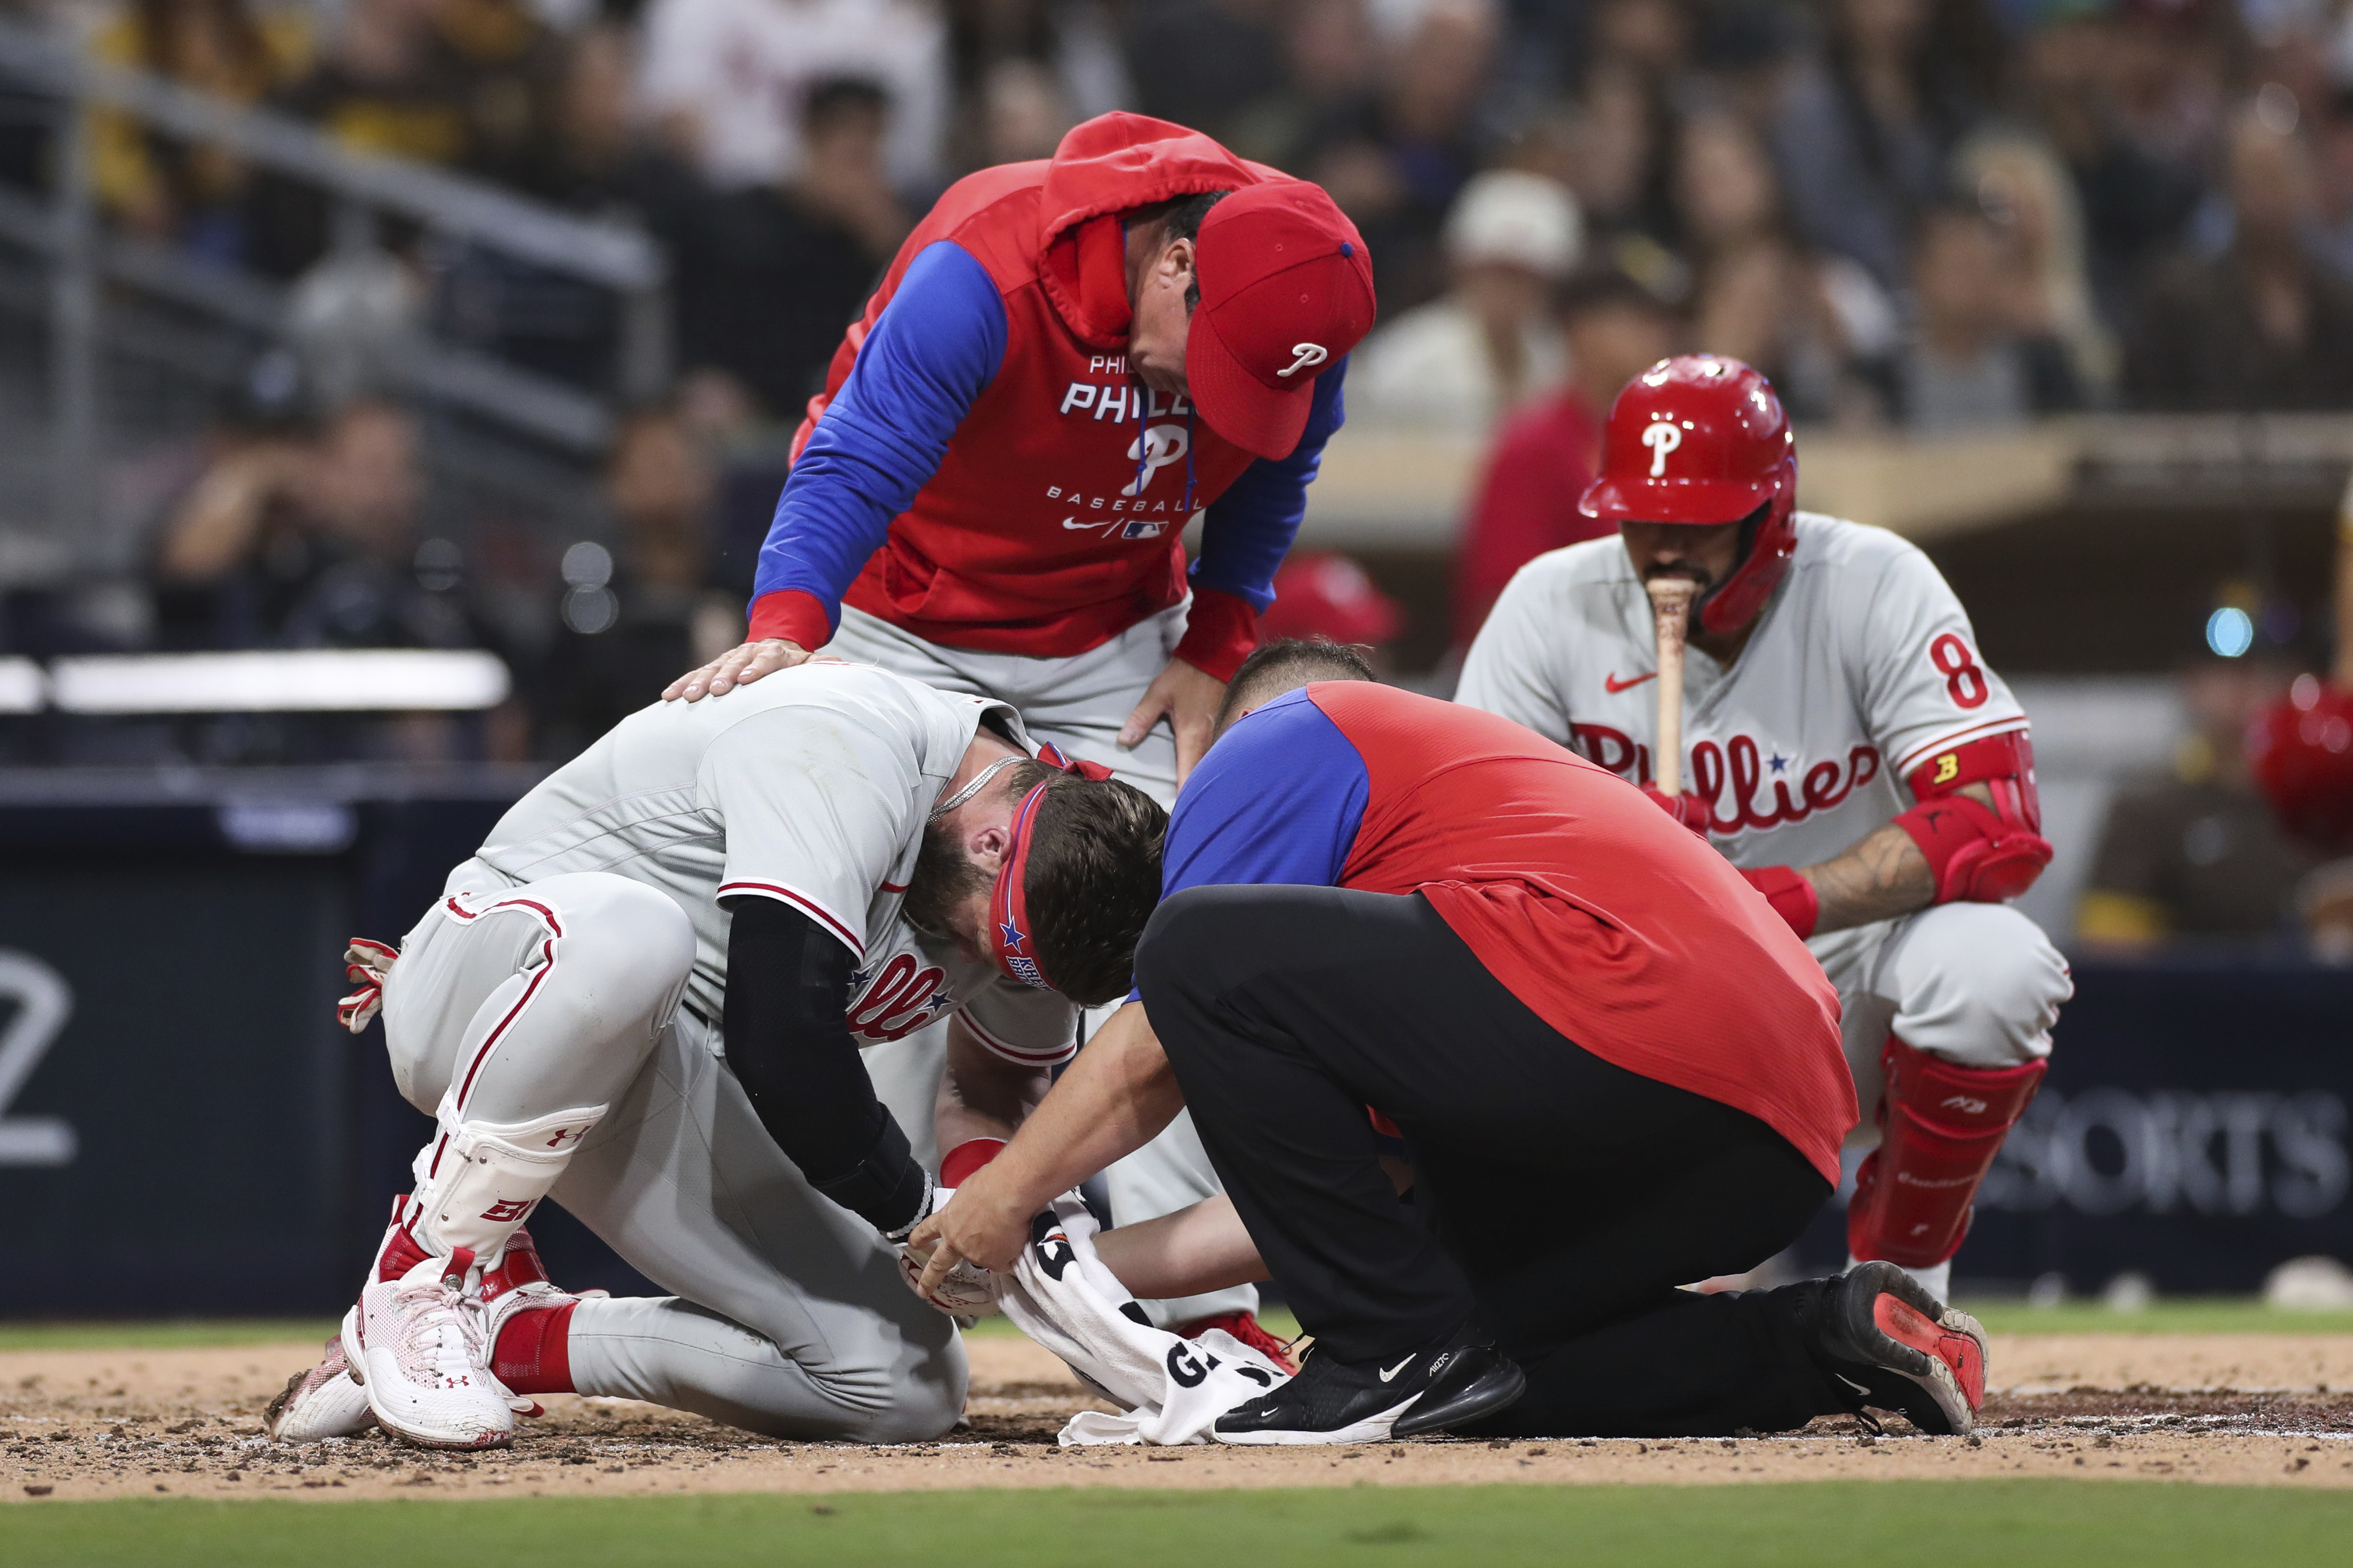 Phillies lose Bryce Harper, J.T. Realmuto, and the game, 4-0, in